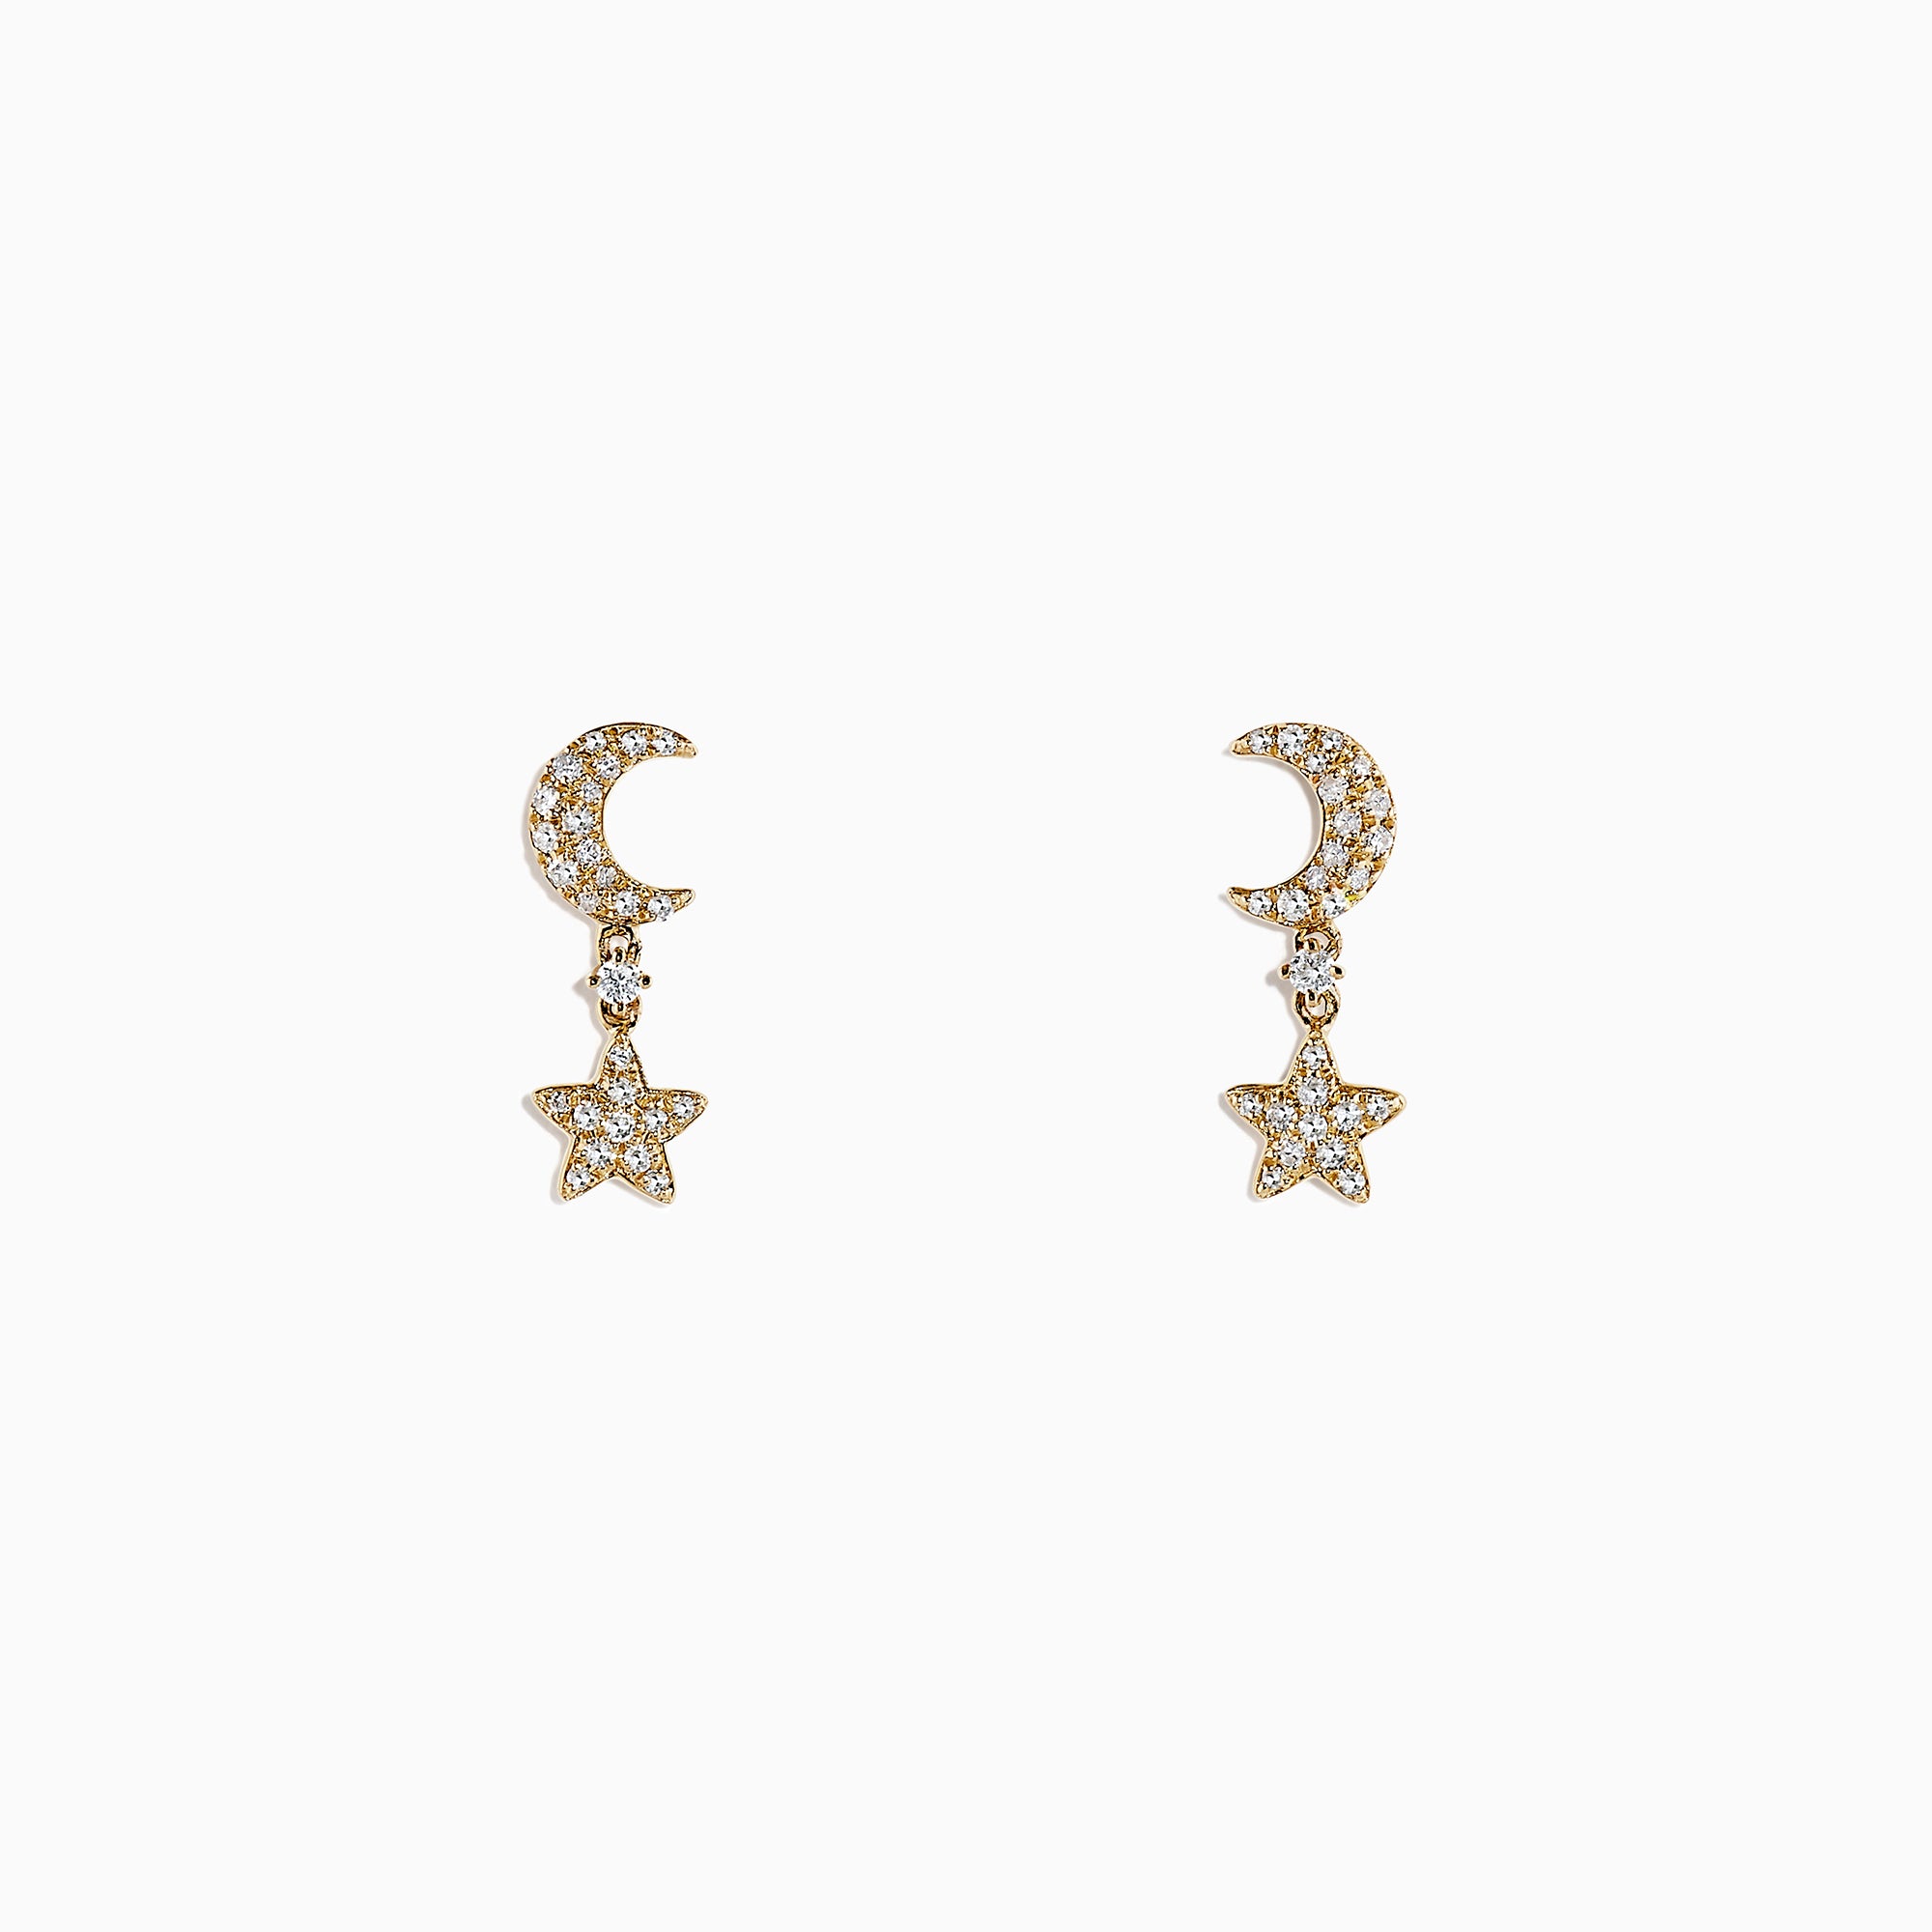 Effy Novelty 14K Yellow Gold Moon and Star Earrings, 0.23 TCW